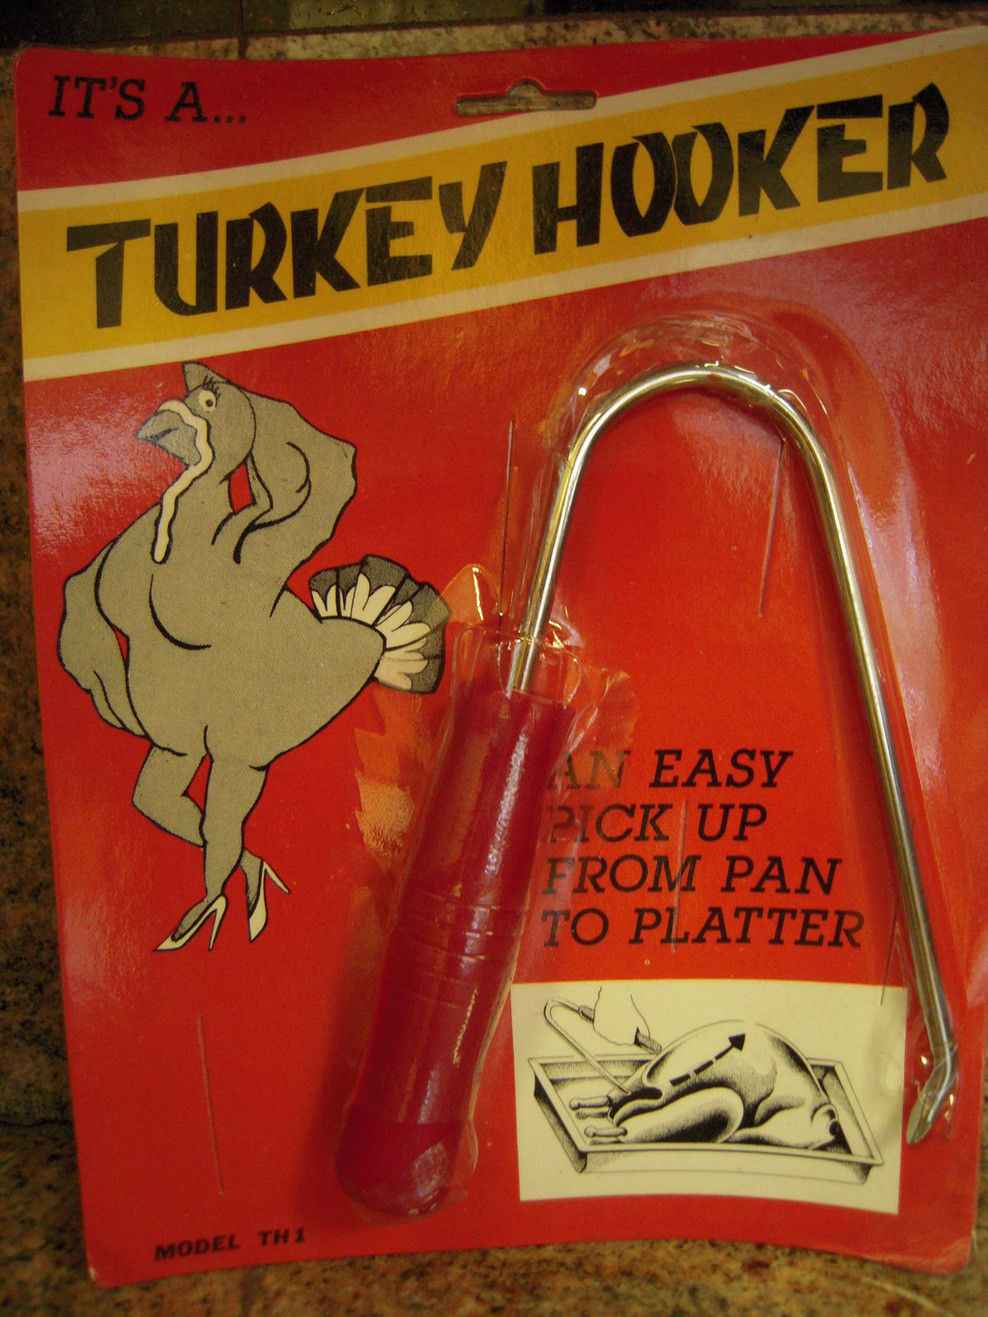 Something about this "Turkey Hooker" just feels wrong